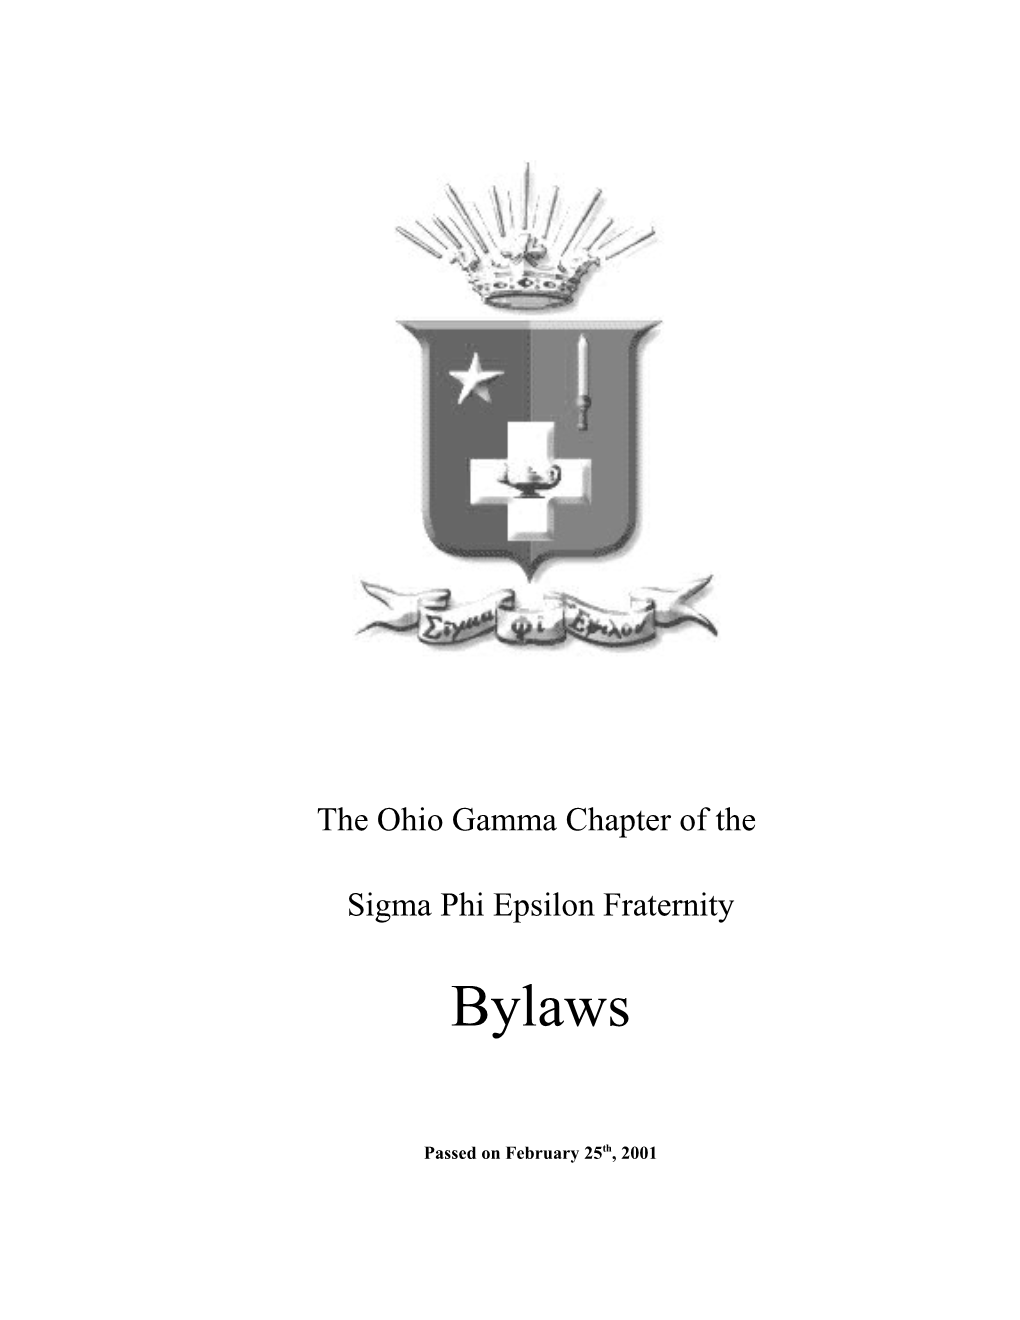 The Ohio Gamma Chapter of The